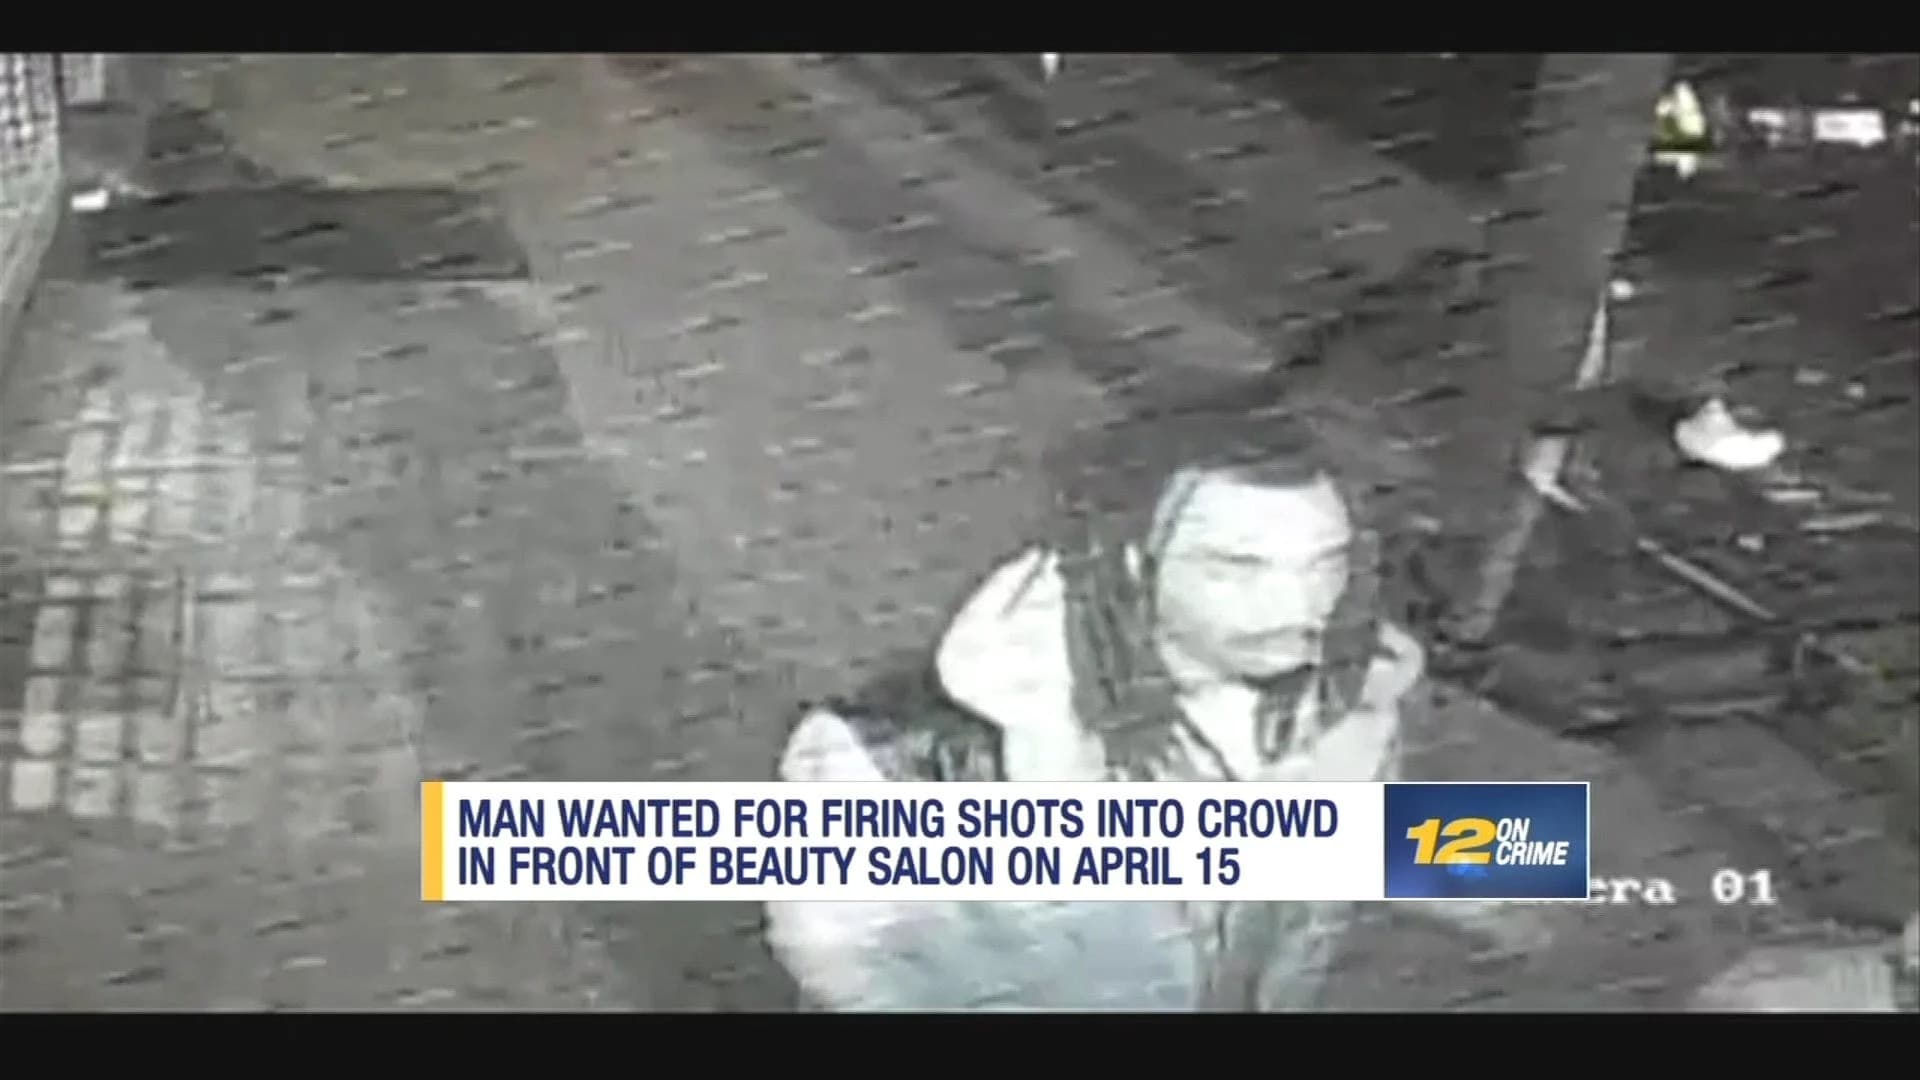 Police: Man fled after firing shots into crowd on Flatbush Ave.